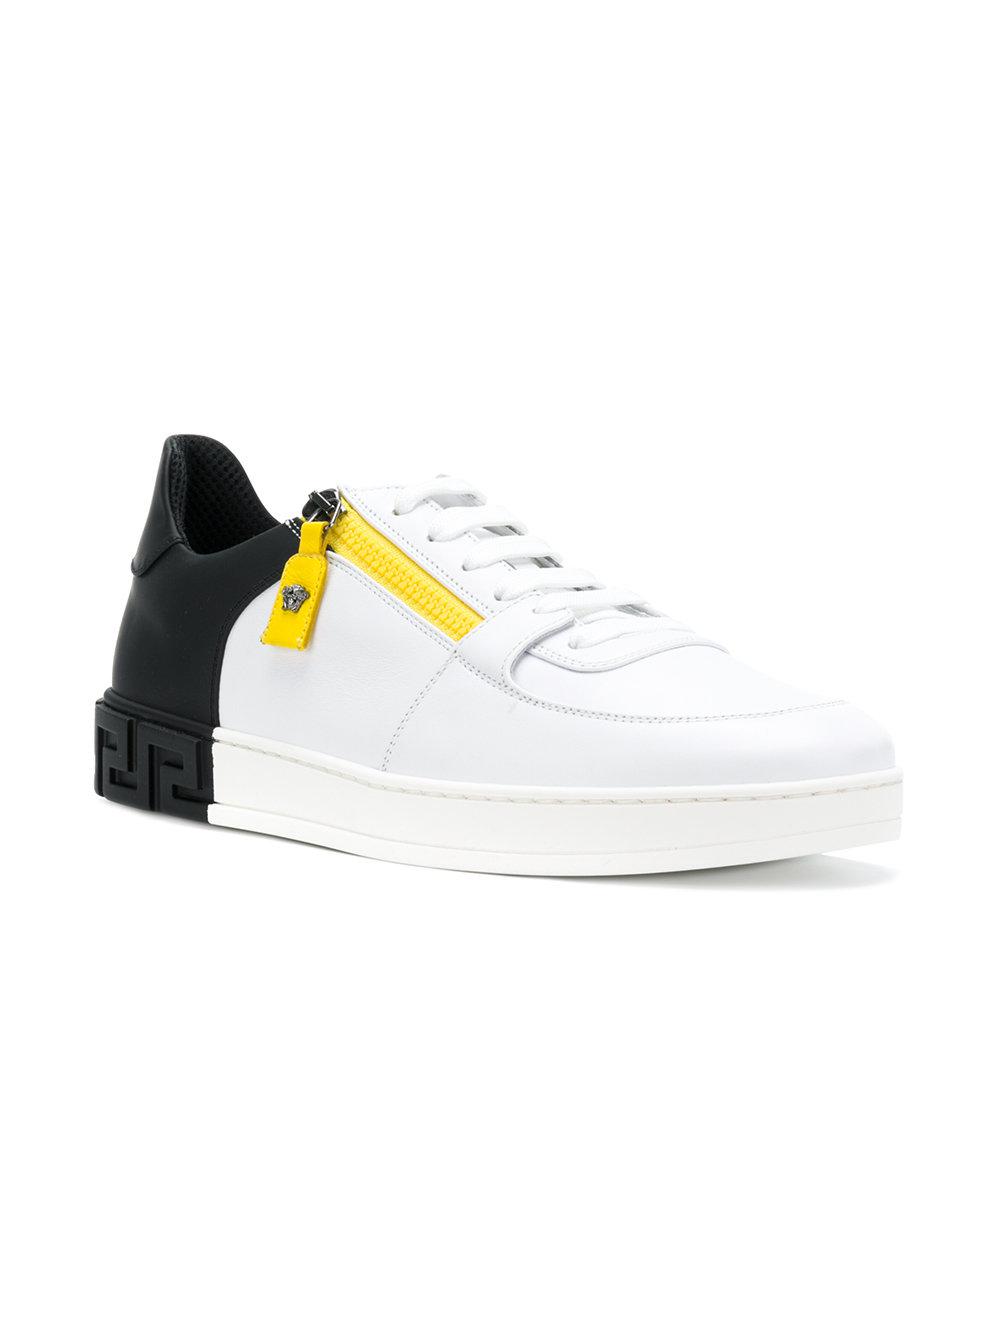 Versace Leather Side Zip Medusa Sneakers in White for Men - Lyst